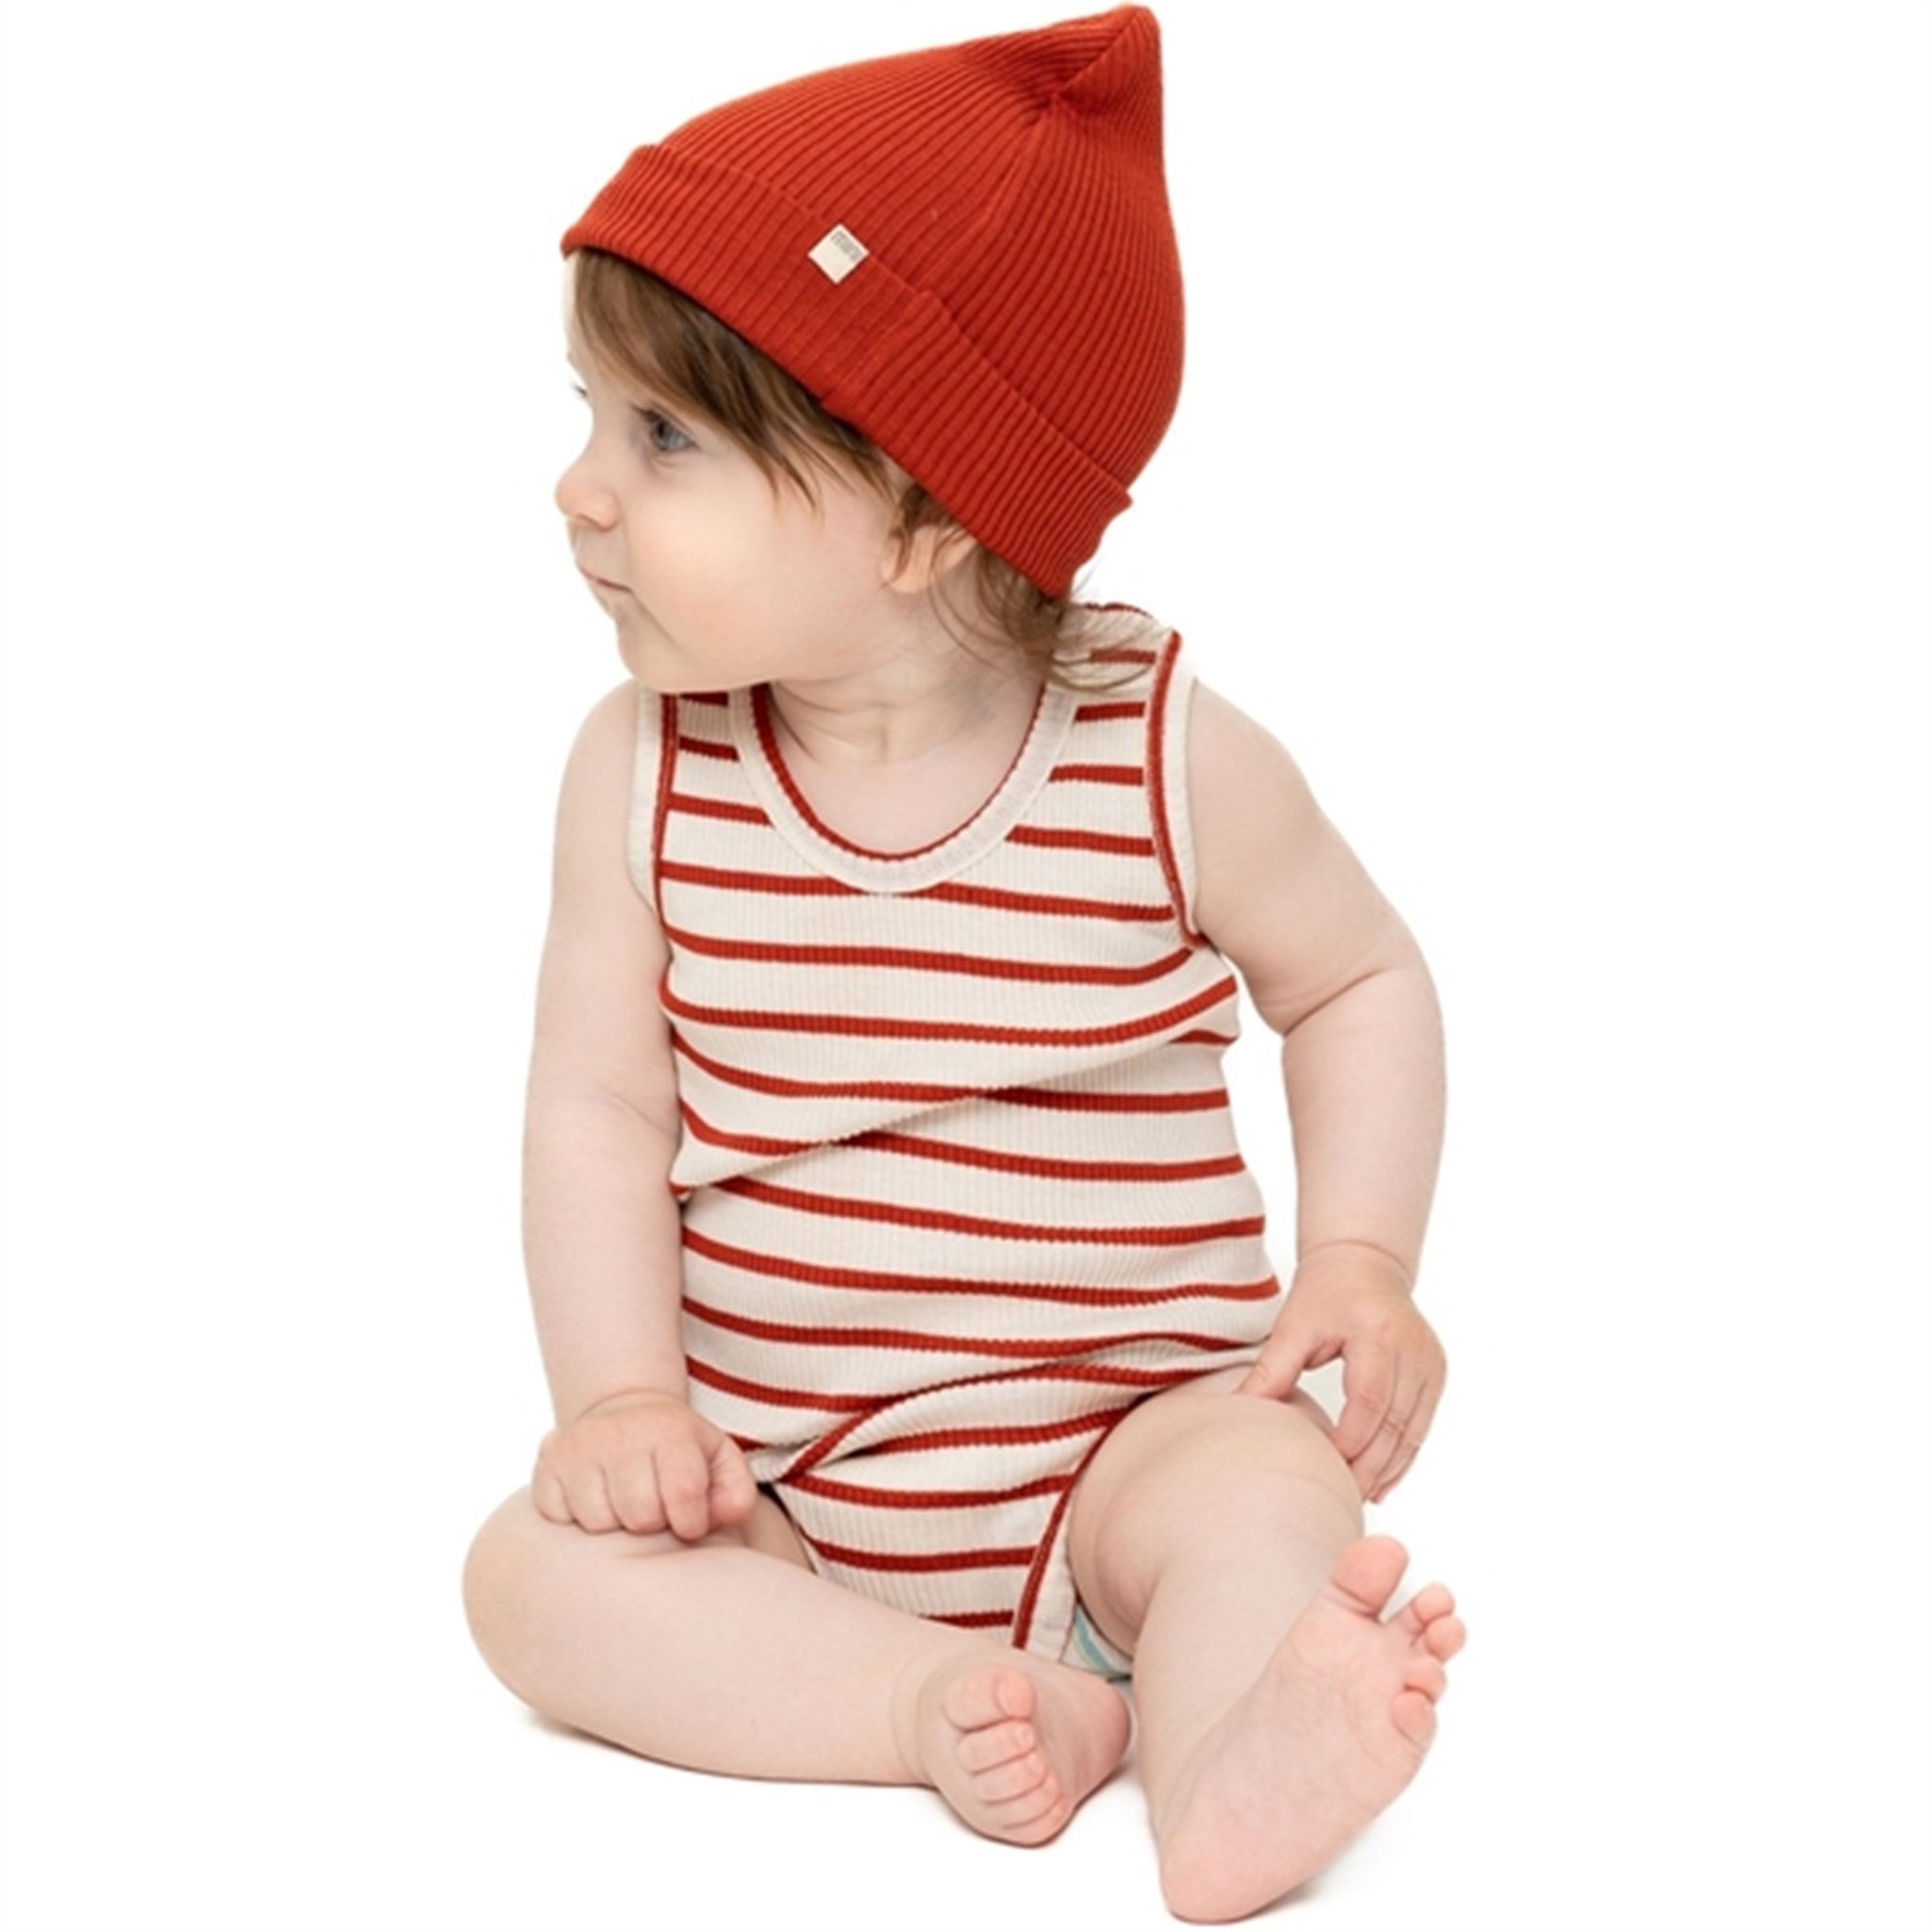 Find children's clothing from Minimalisma // Fast shipping